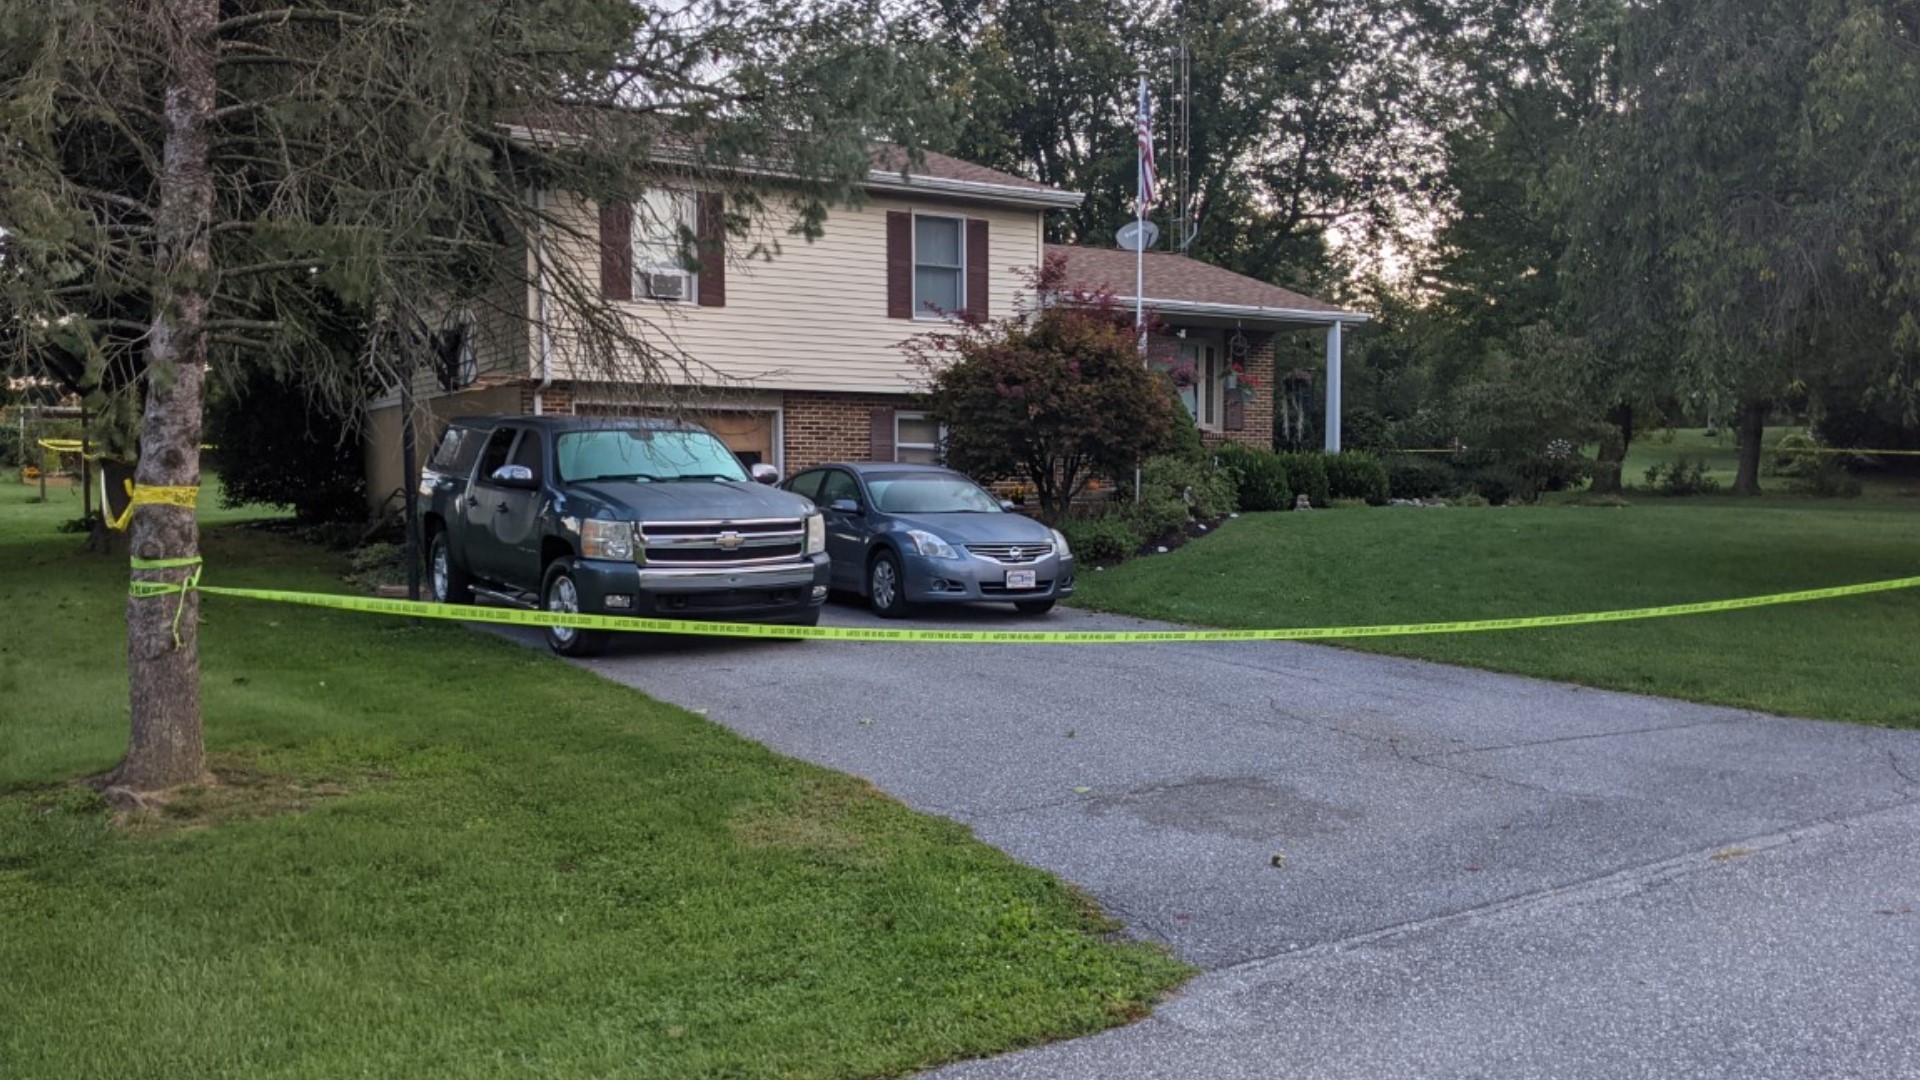 Police say that Wesley Frey Jr. allegedly shot his father, Wesley Frey Sr., in the chest with a crossbow before barricading himself in a room and committing suicide.